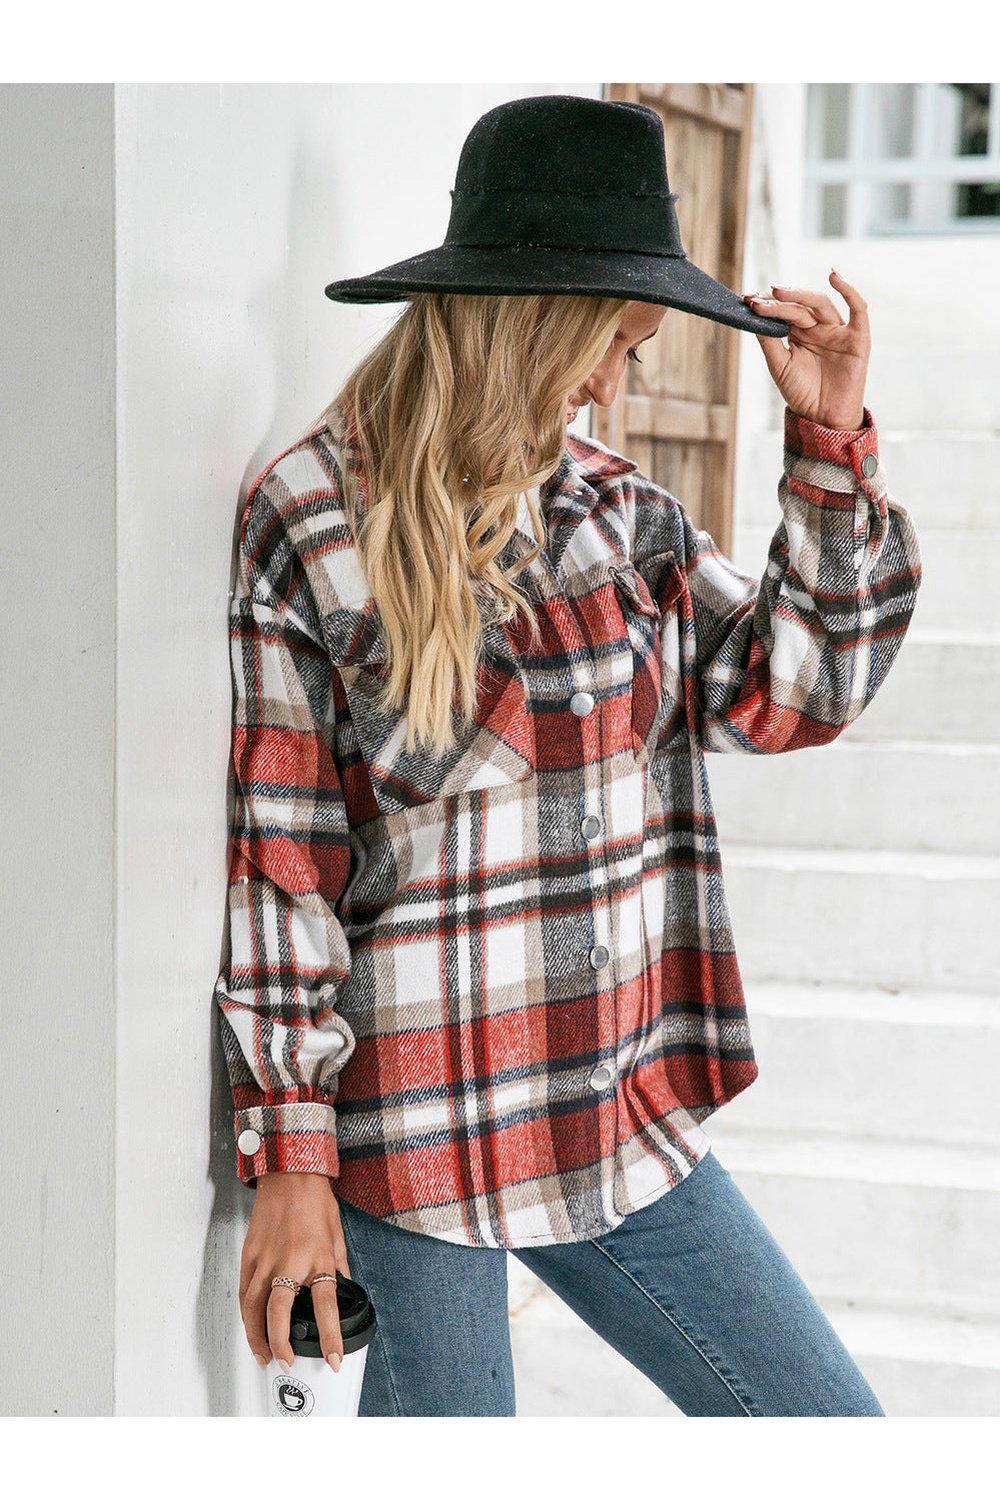 Meet You Outside Plaid Button Down Curved Hem Shacket - Jackets - FITGGINS